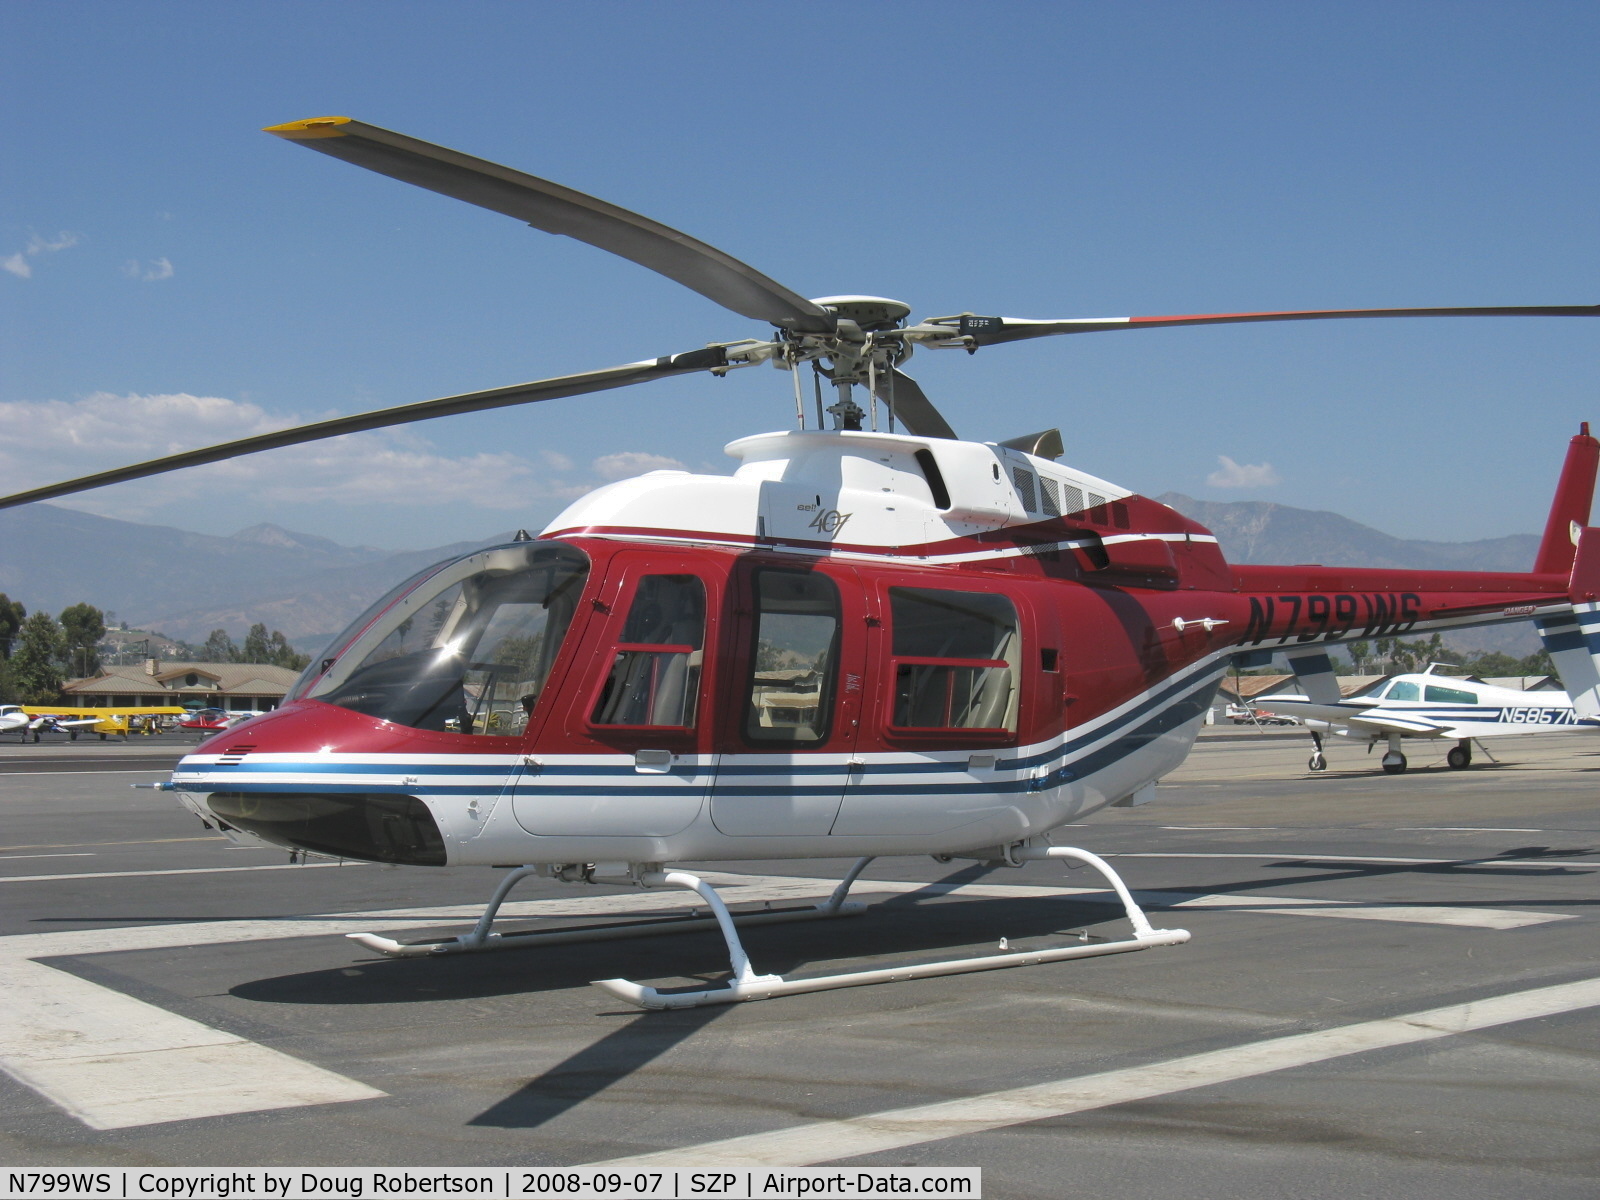 N799WS, 2002 Bell 407 C/N 53538, 2002 Bell 407, one Rolls Royce 250-C47B turboshaft rated at 813 shp for takeoff, 701 shp continuous